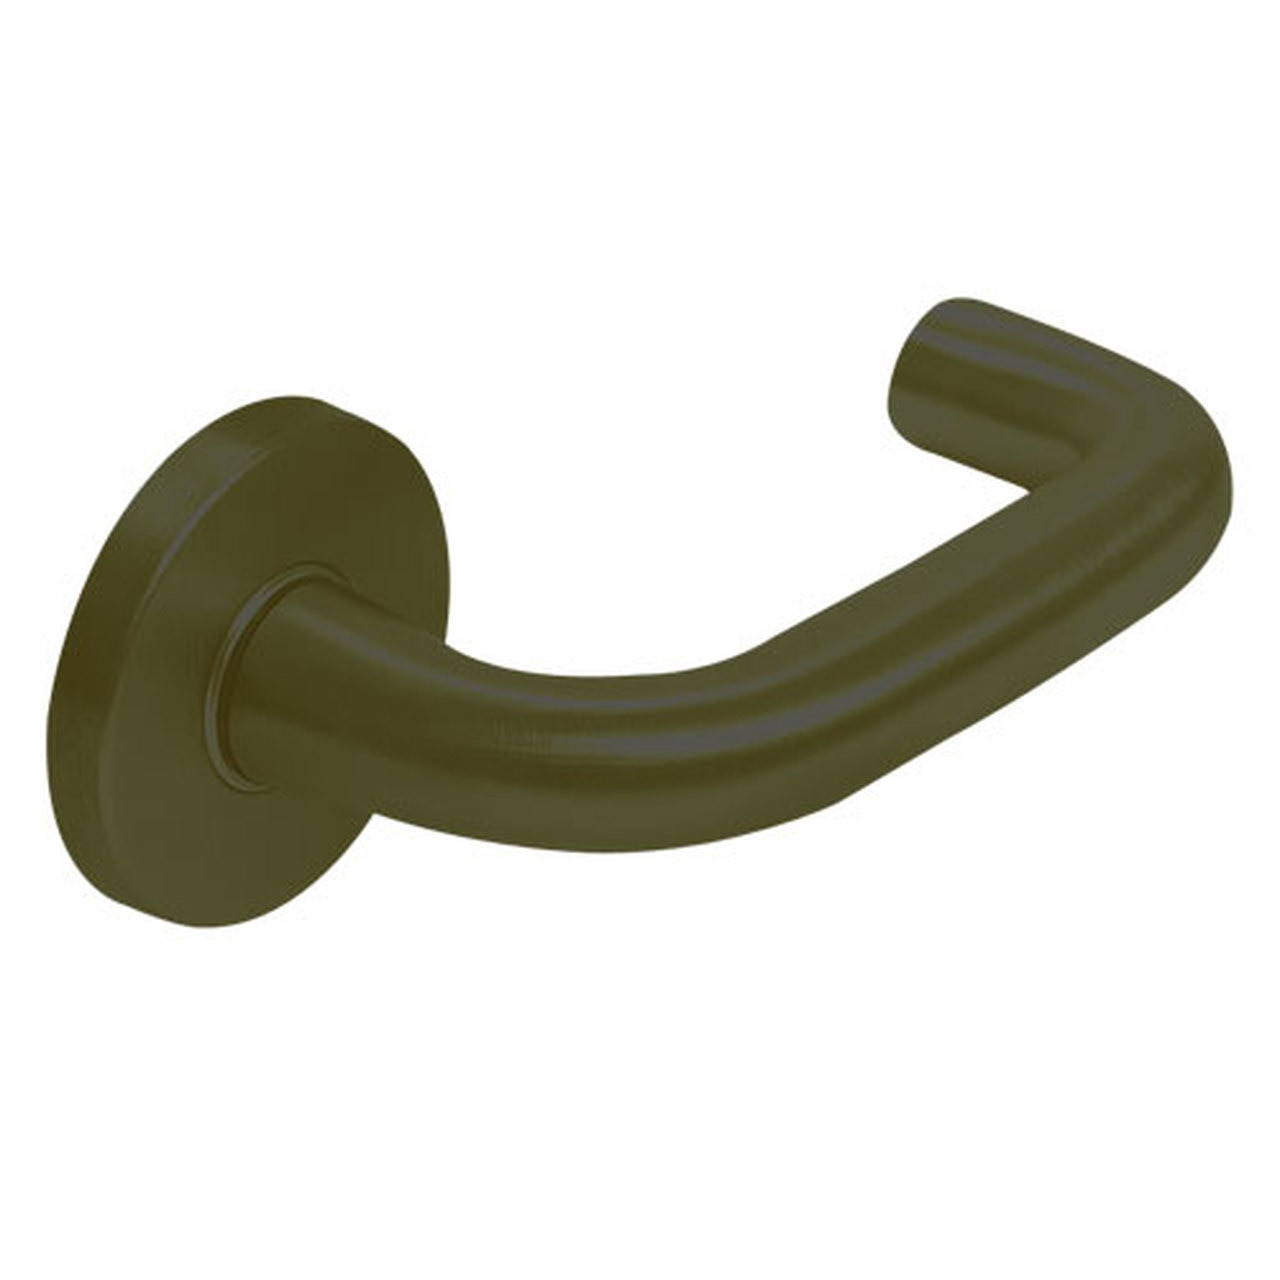 ML2042-LSA-613-M31 Corbin Russwin ML2000 Series Mortise Entrance Trim Pack with Lustra Lever in Oil Rubbed Bronze